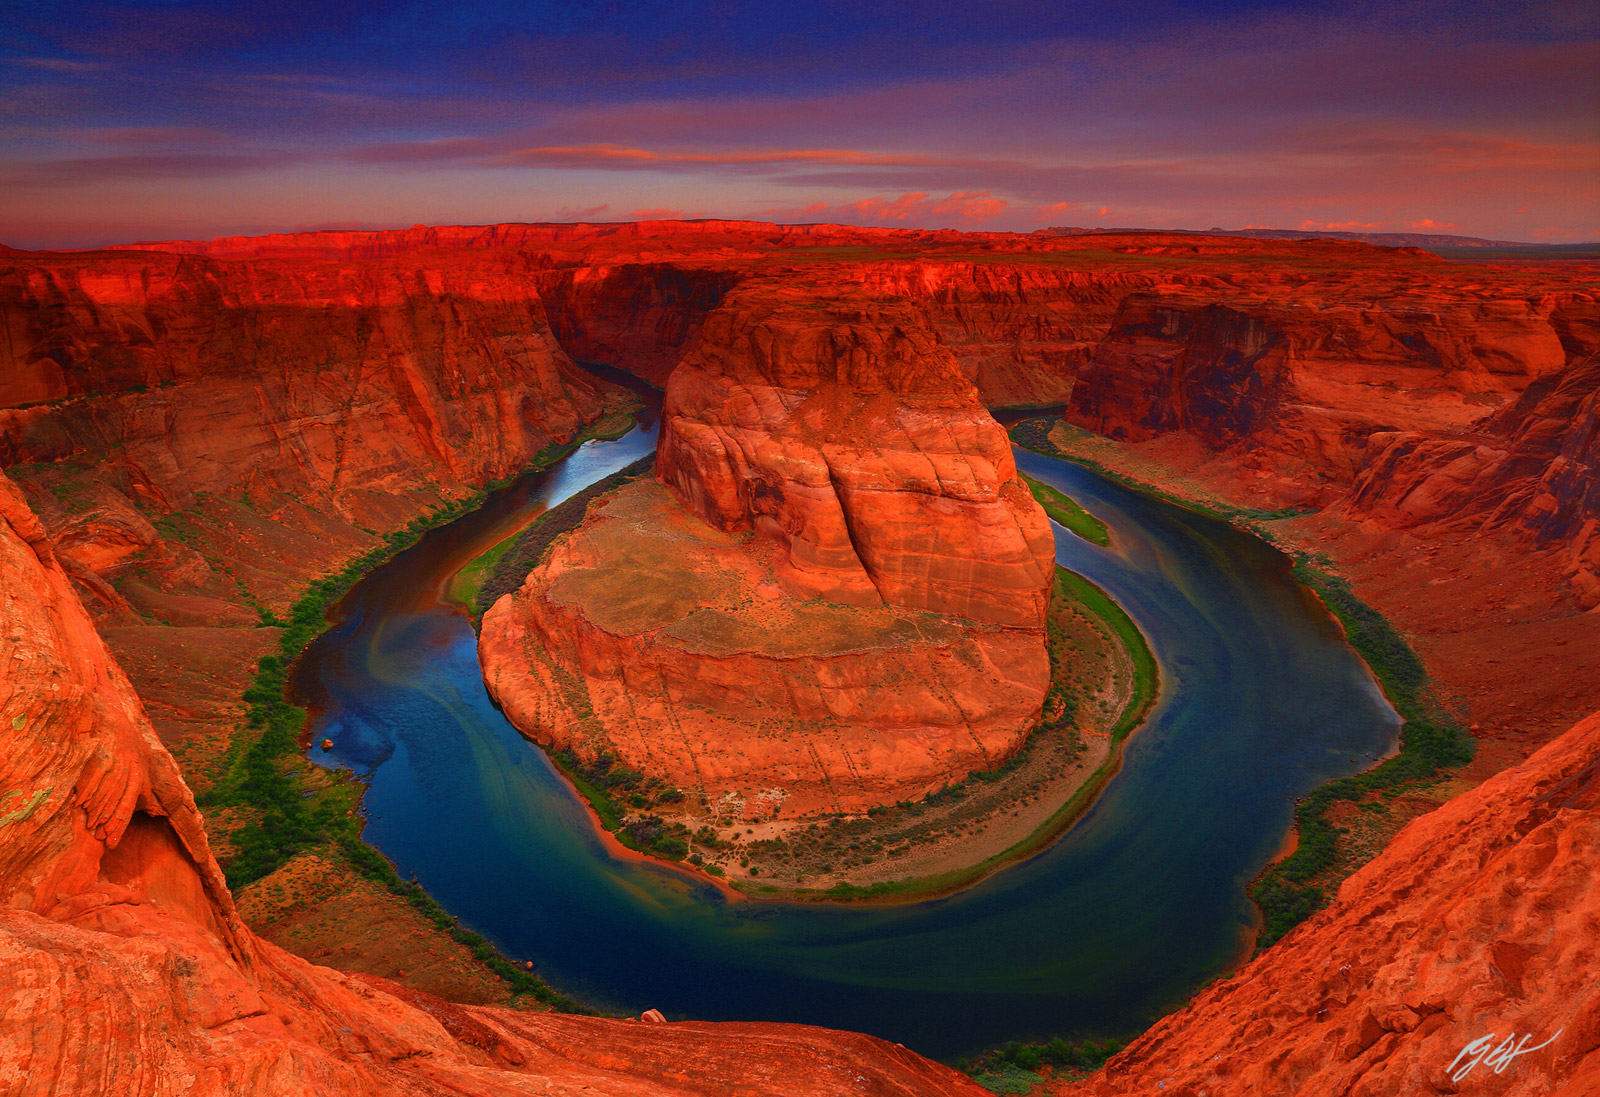 Sunrise Horseshoe Bend and the Colorado River in the Glen Canyon Recreation Area in Arizona